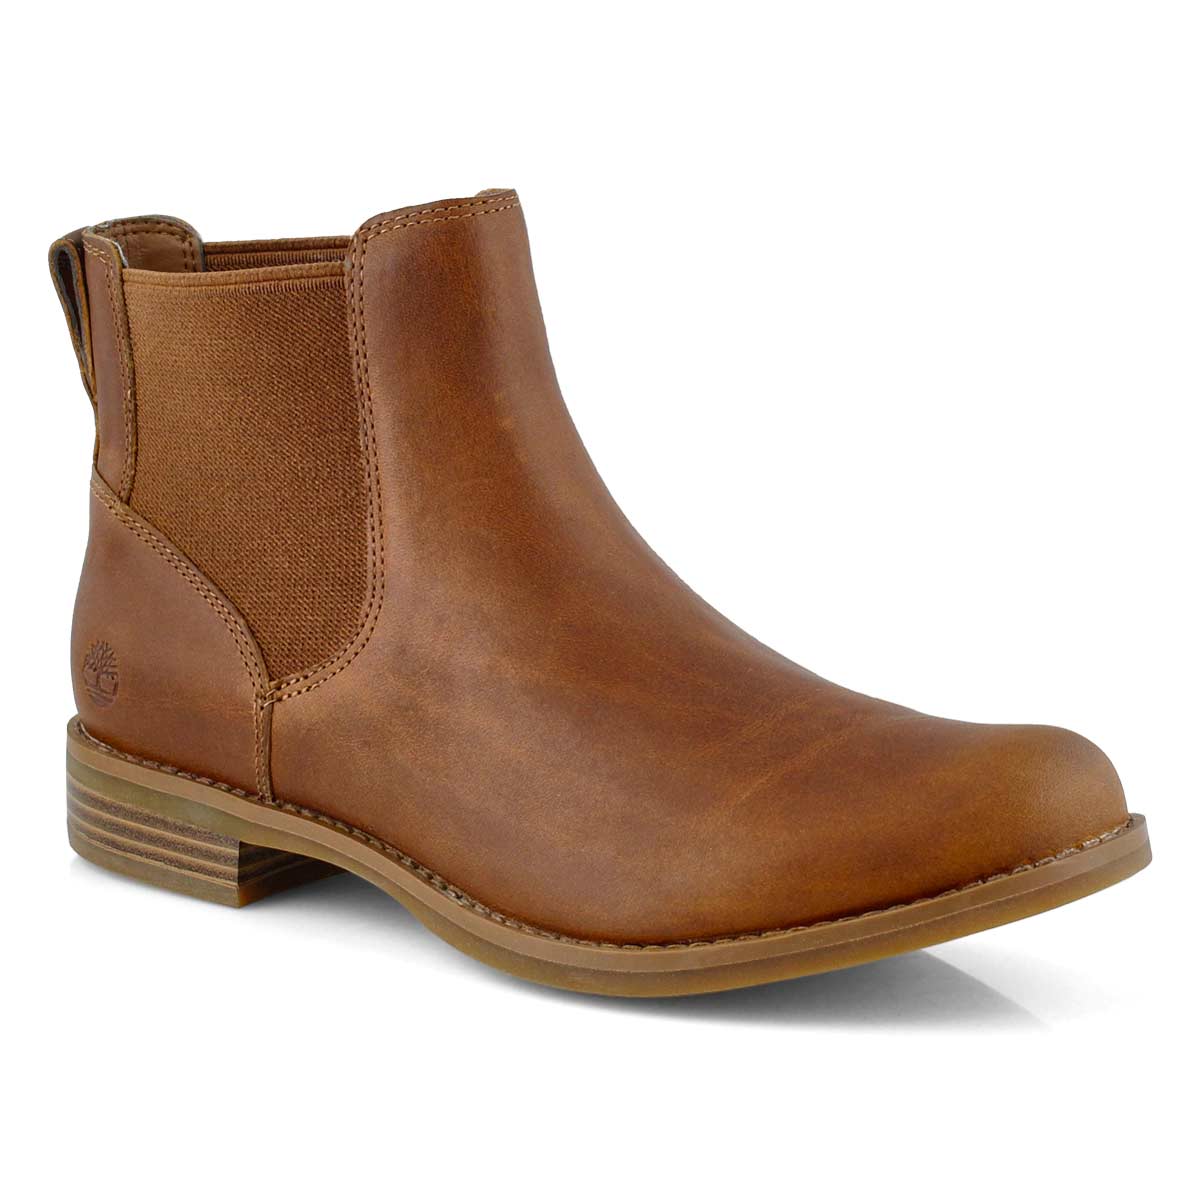 Timberland Women's Magby Chelsea Boot - Light | SoftMoc.com